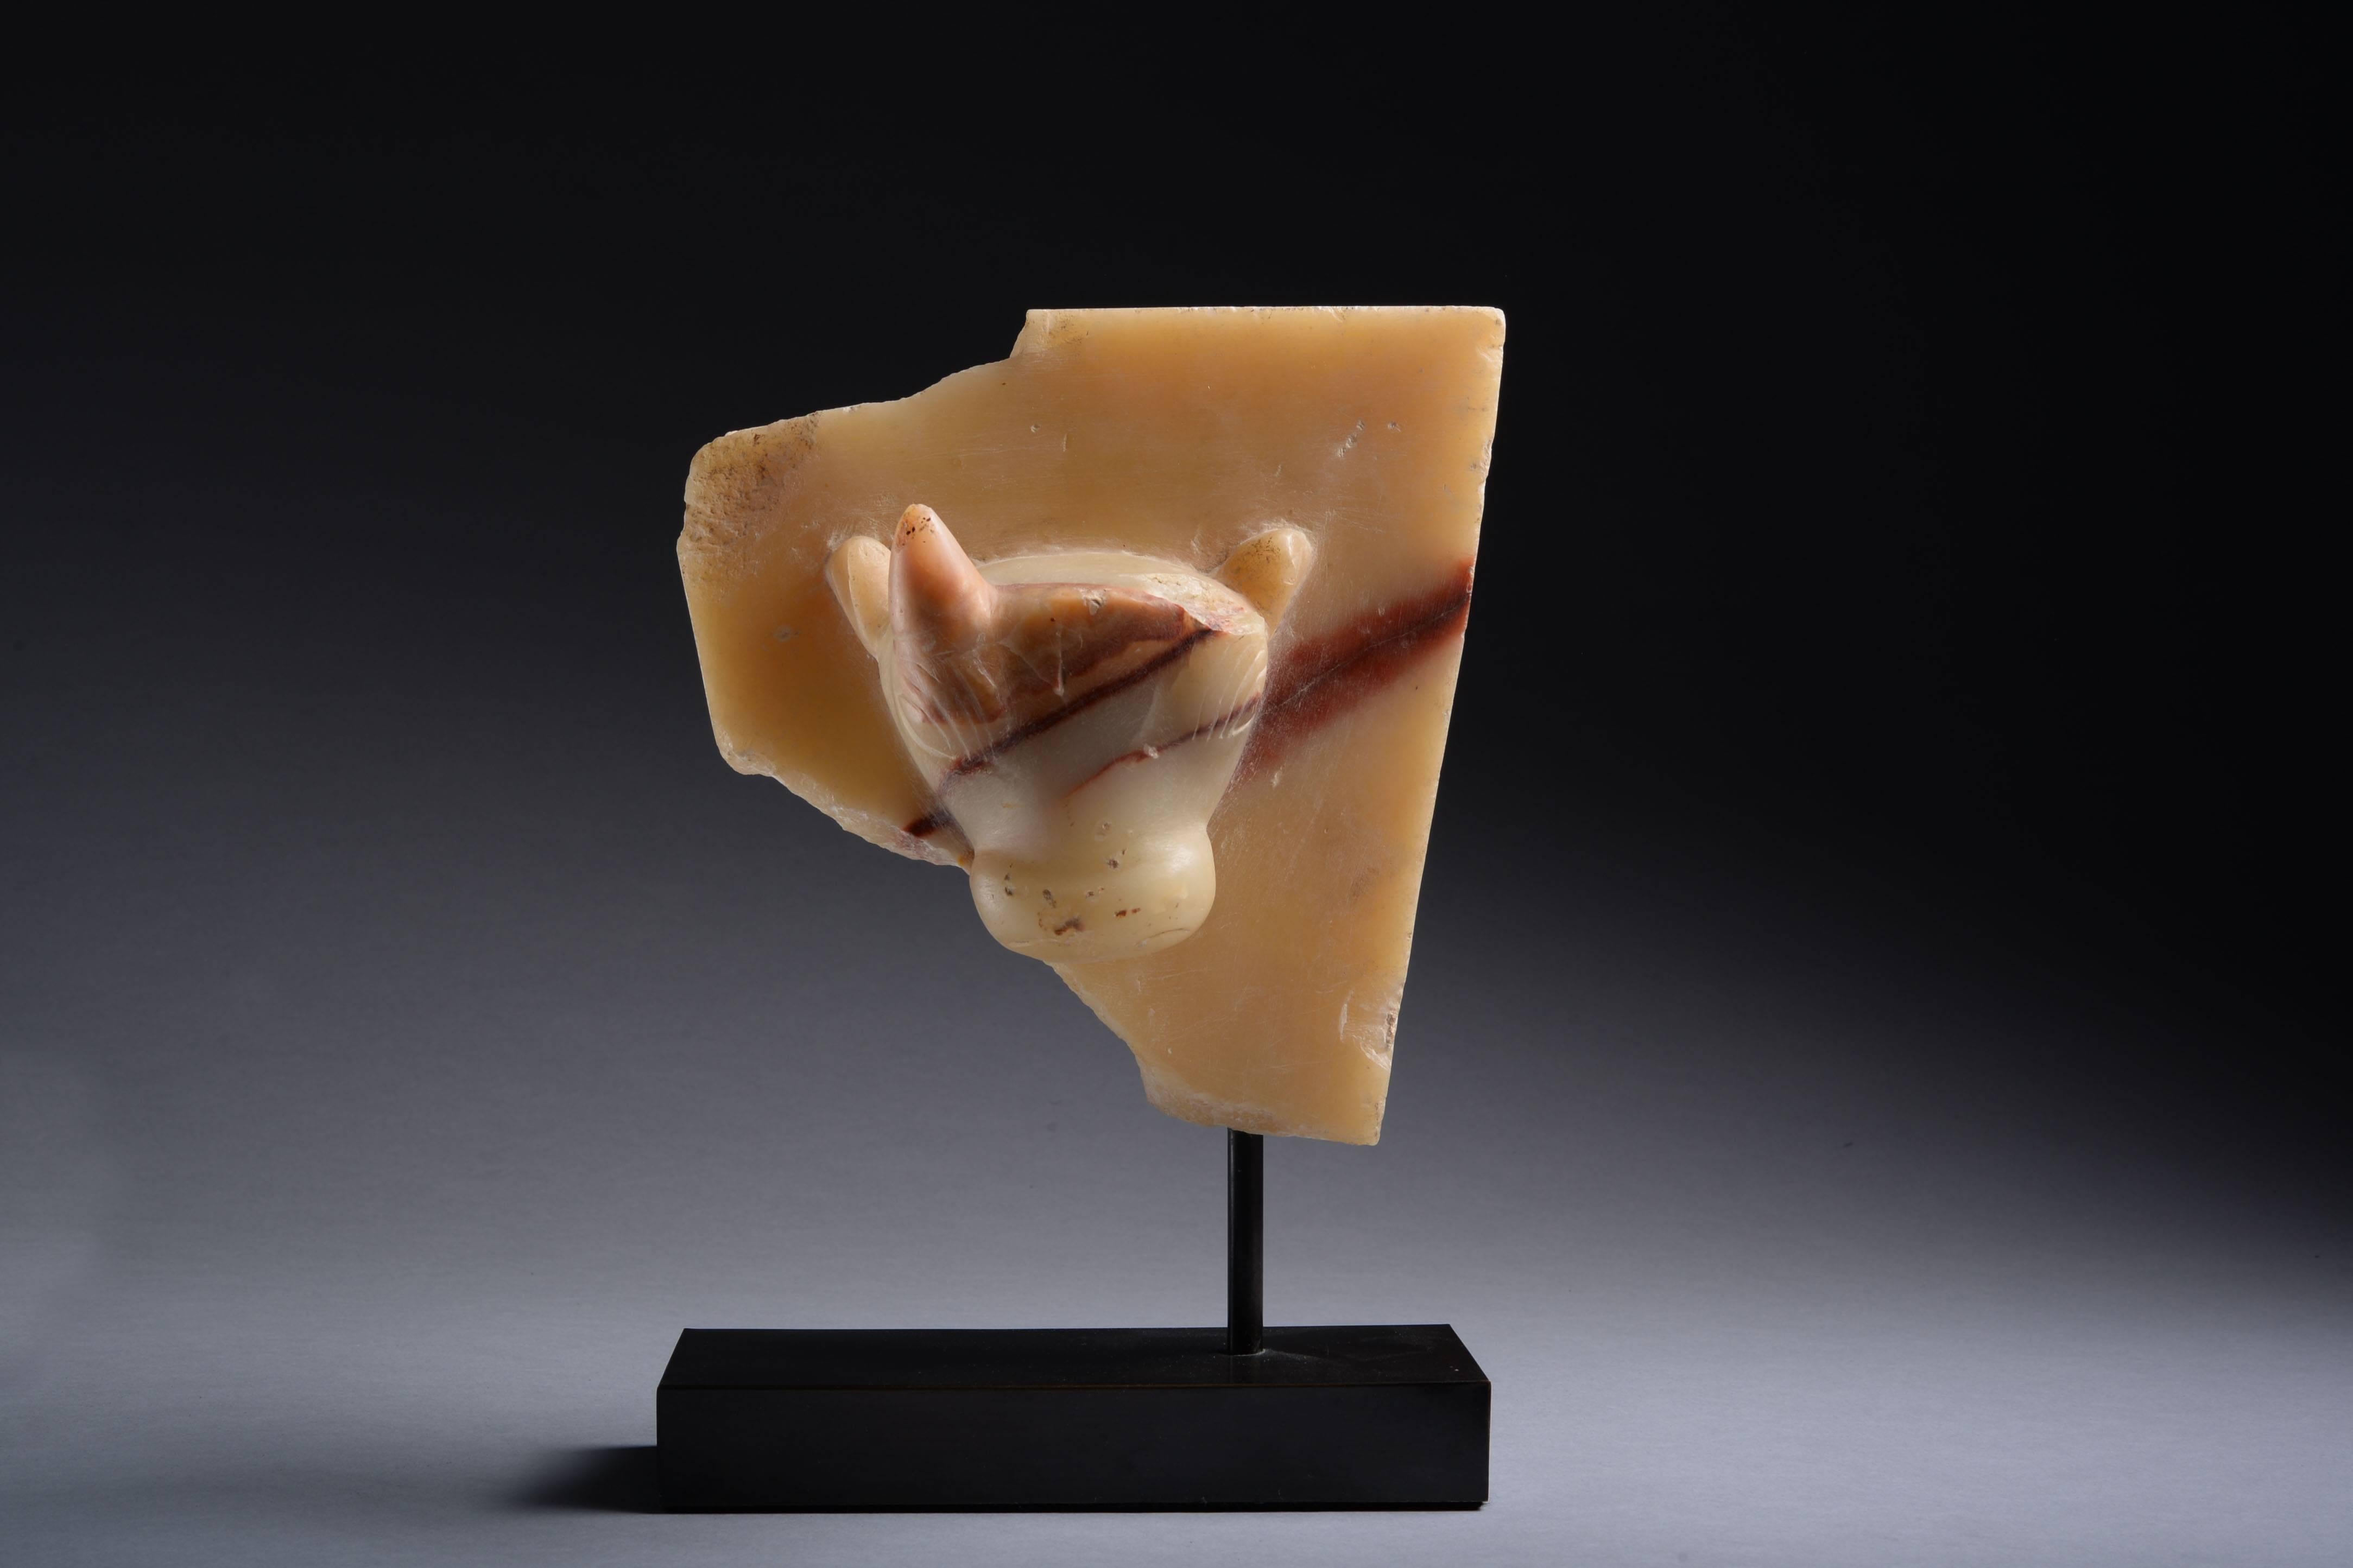 A South Arabian alabaster stele fragment, dating to the 1st century BC-1st century AD.

Carved from a block of red veined alabaster, the centre with a bull's head, in high relief. The creature is shown with conical horns and raised ears, the